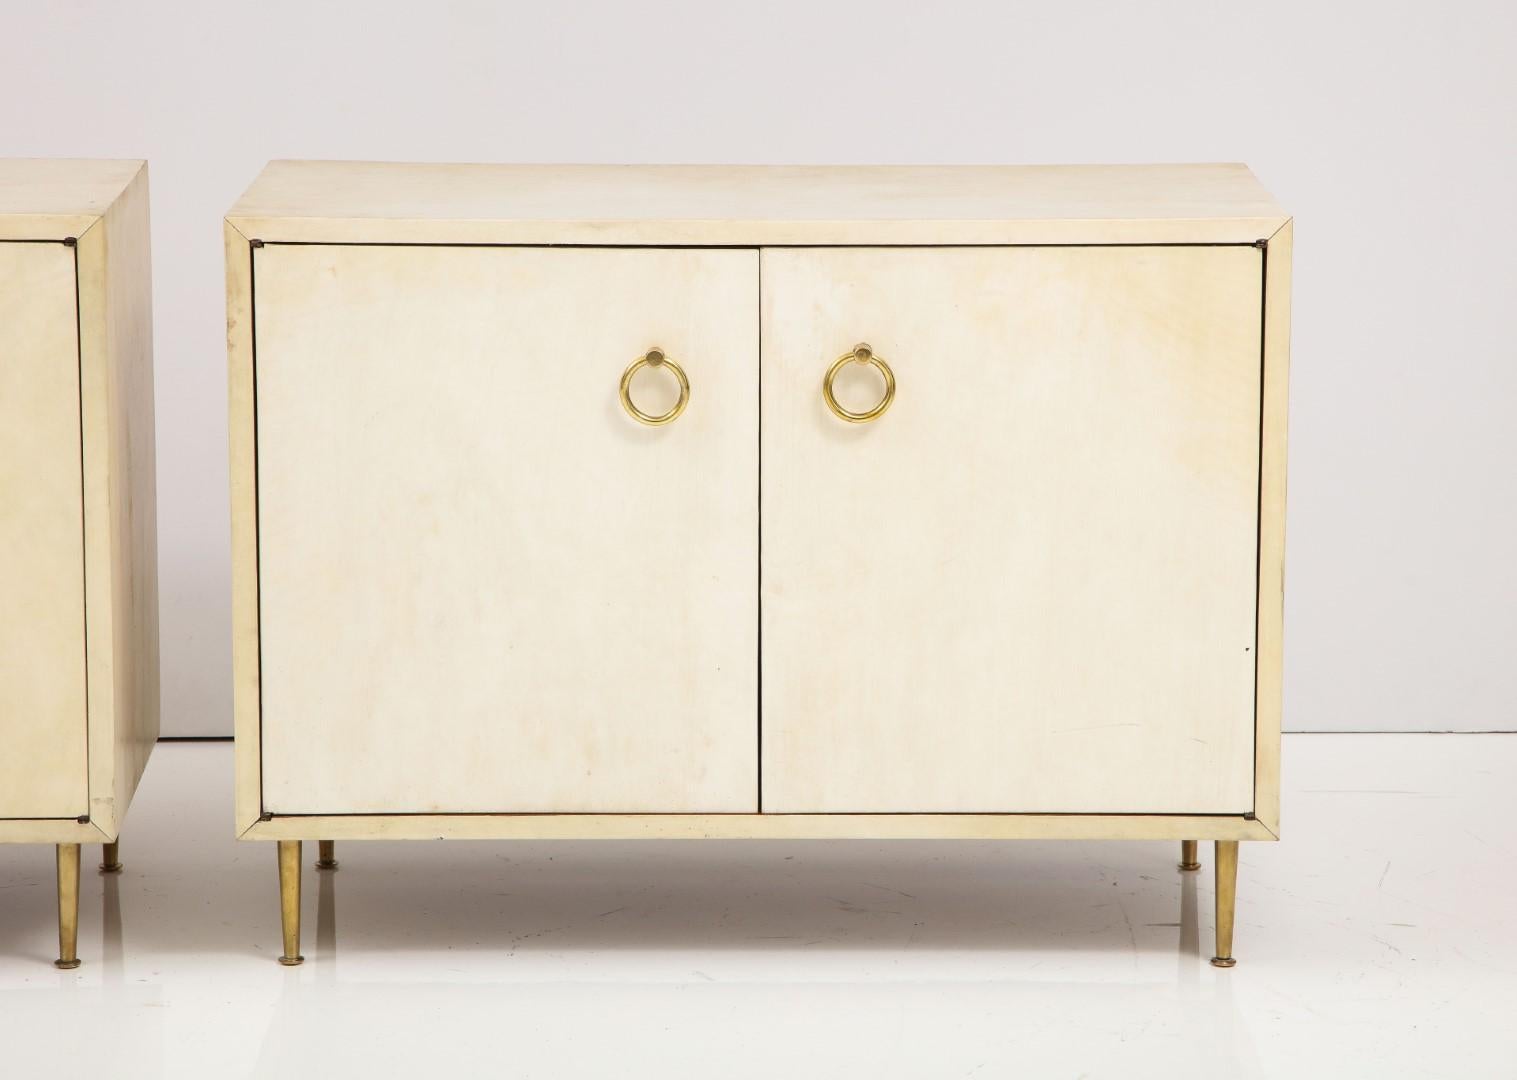 A wonderful Pair of Parchment chests in the Manner of Gio Ponti. The chests contain a shelf and stand on brass tapering legs.